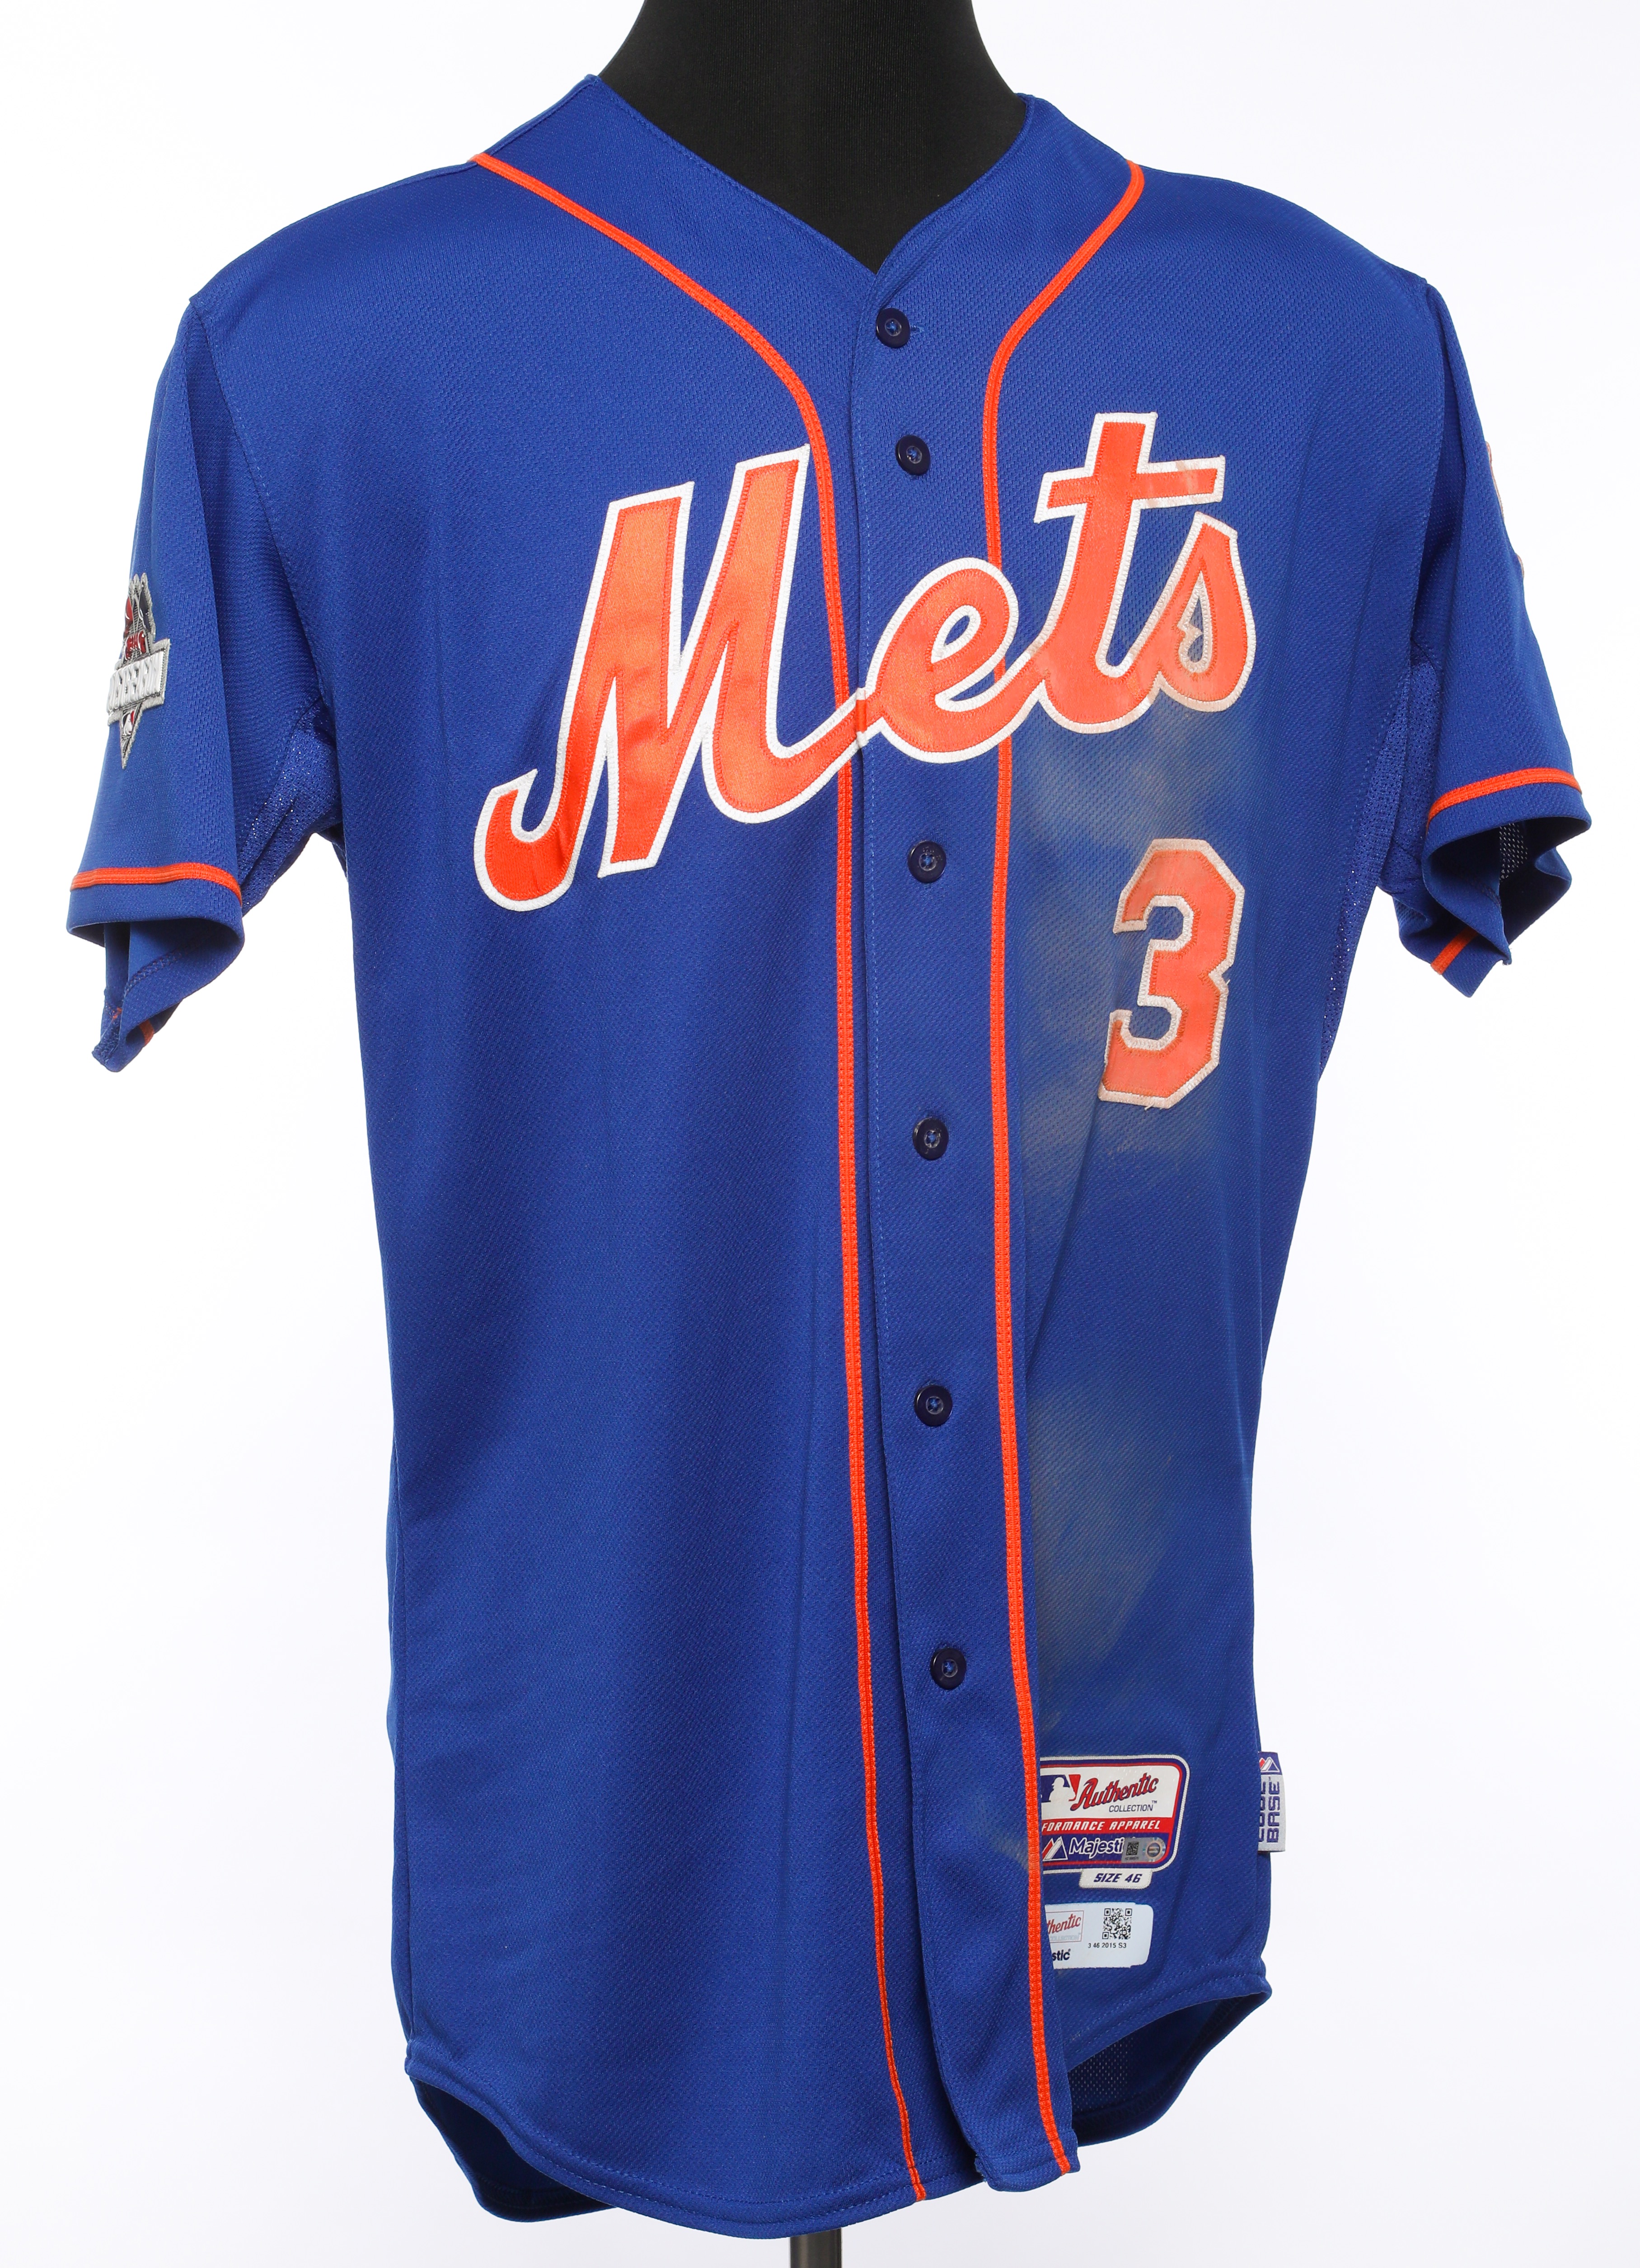 Curtis Granderson 2015 NLCS Jersey - Mets History